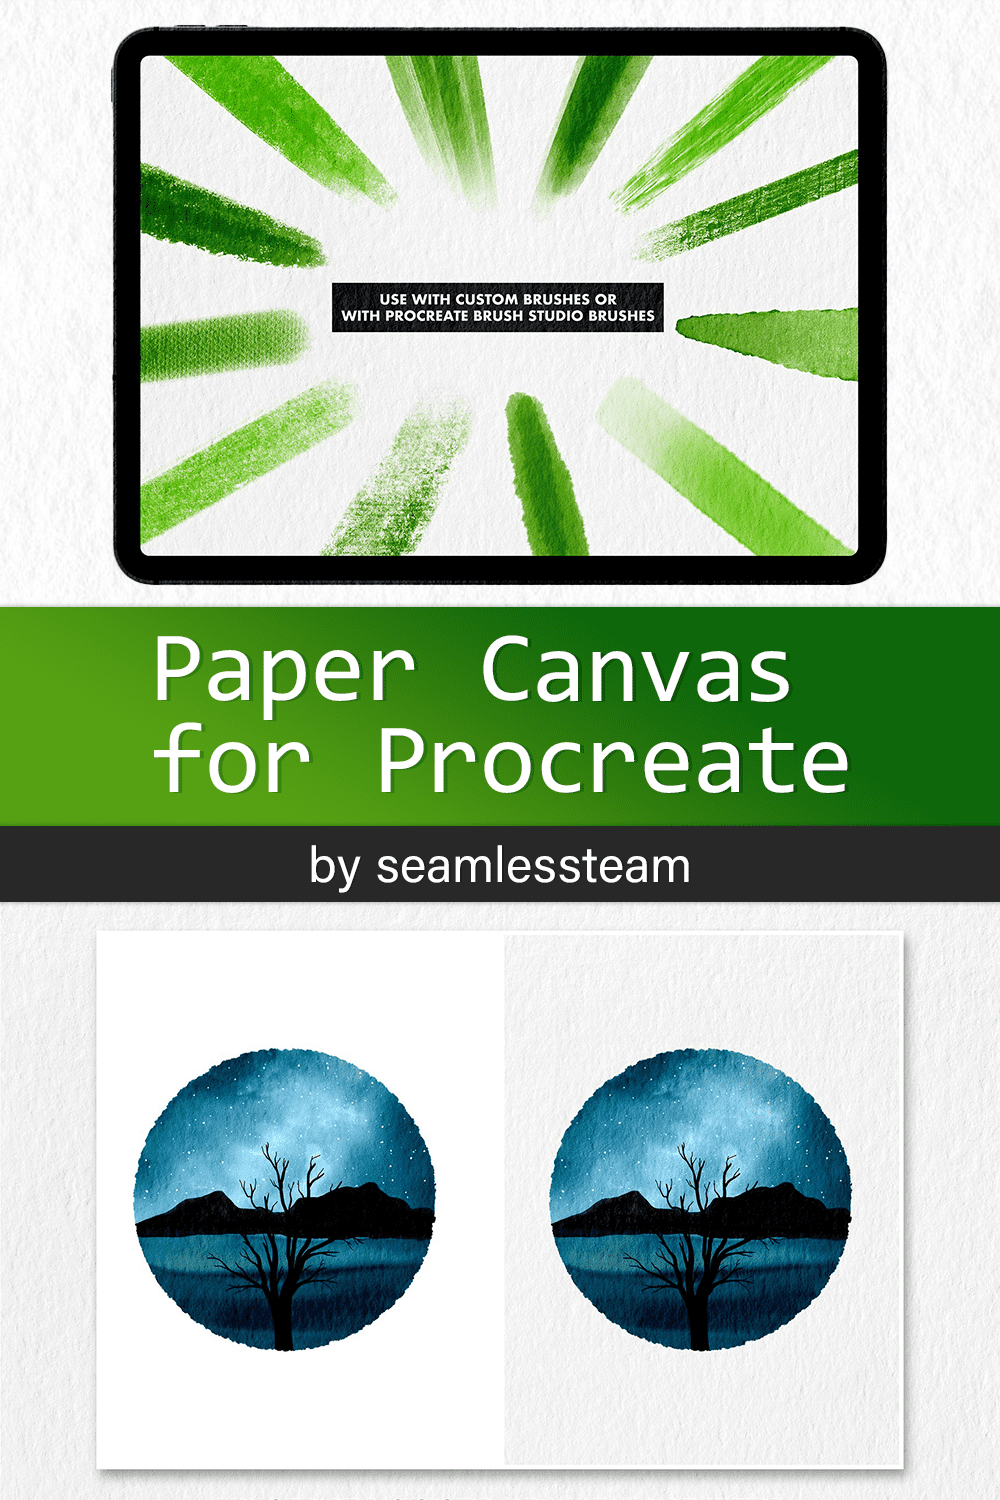 Paper Canvas for Procreate - pinterest image preview.